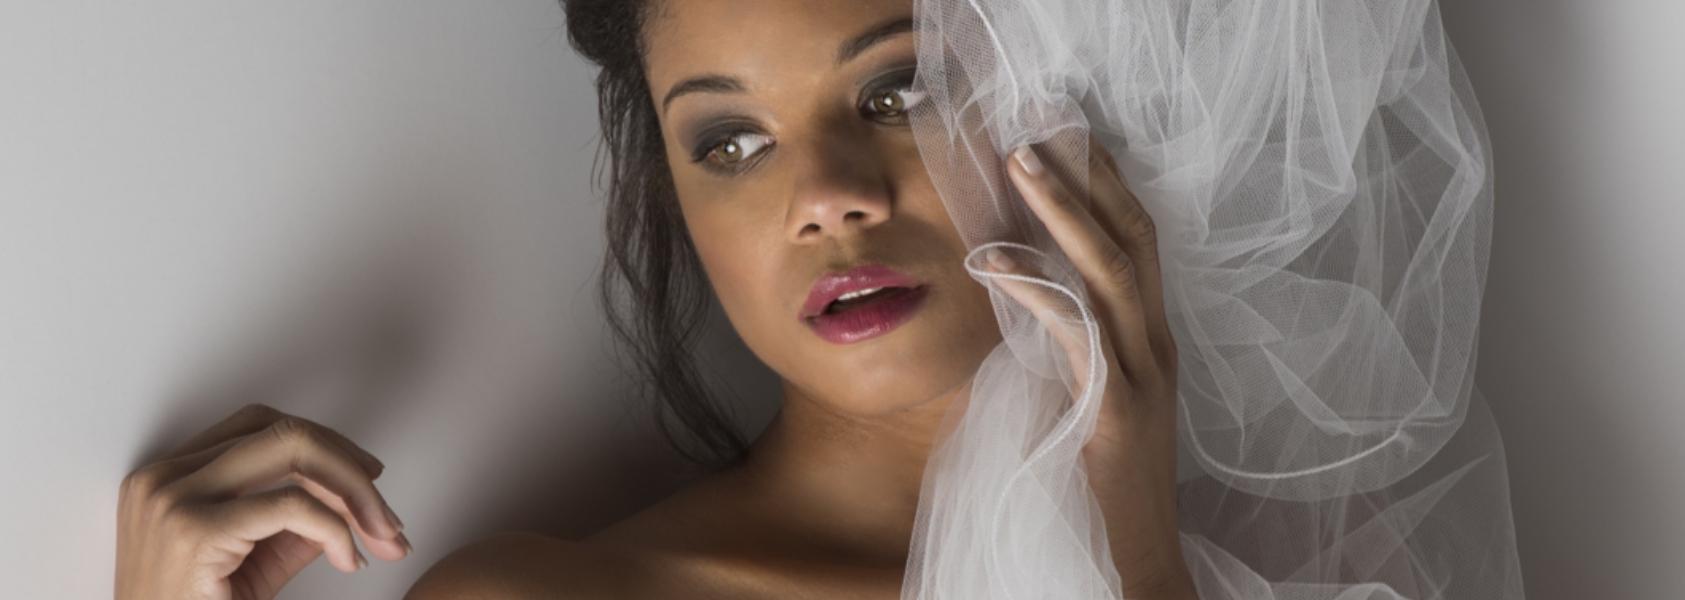 Dissecting Imposter Bridal & Wedding Syndrome